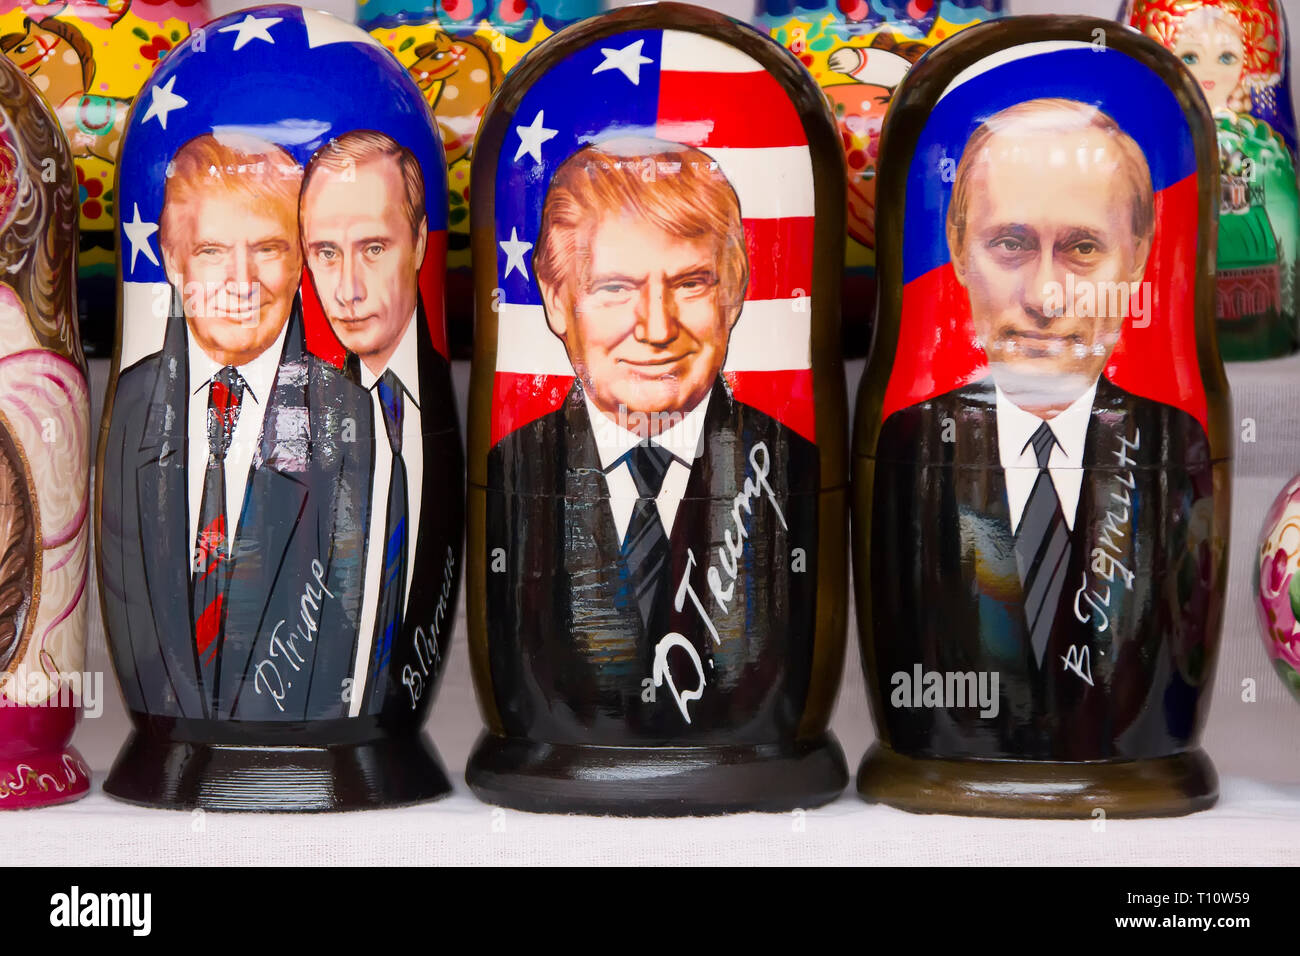 .Russian traditional nested dolls. Dolls have a portrait of Vladimir Putin and Donald Trump Stock Photo